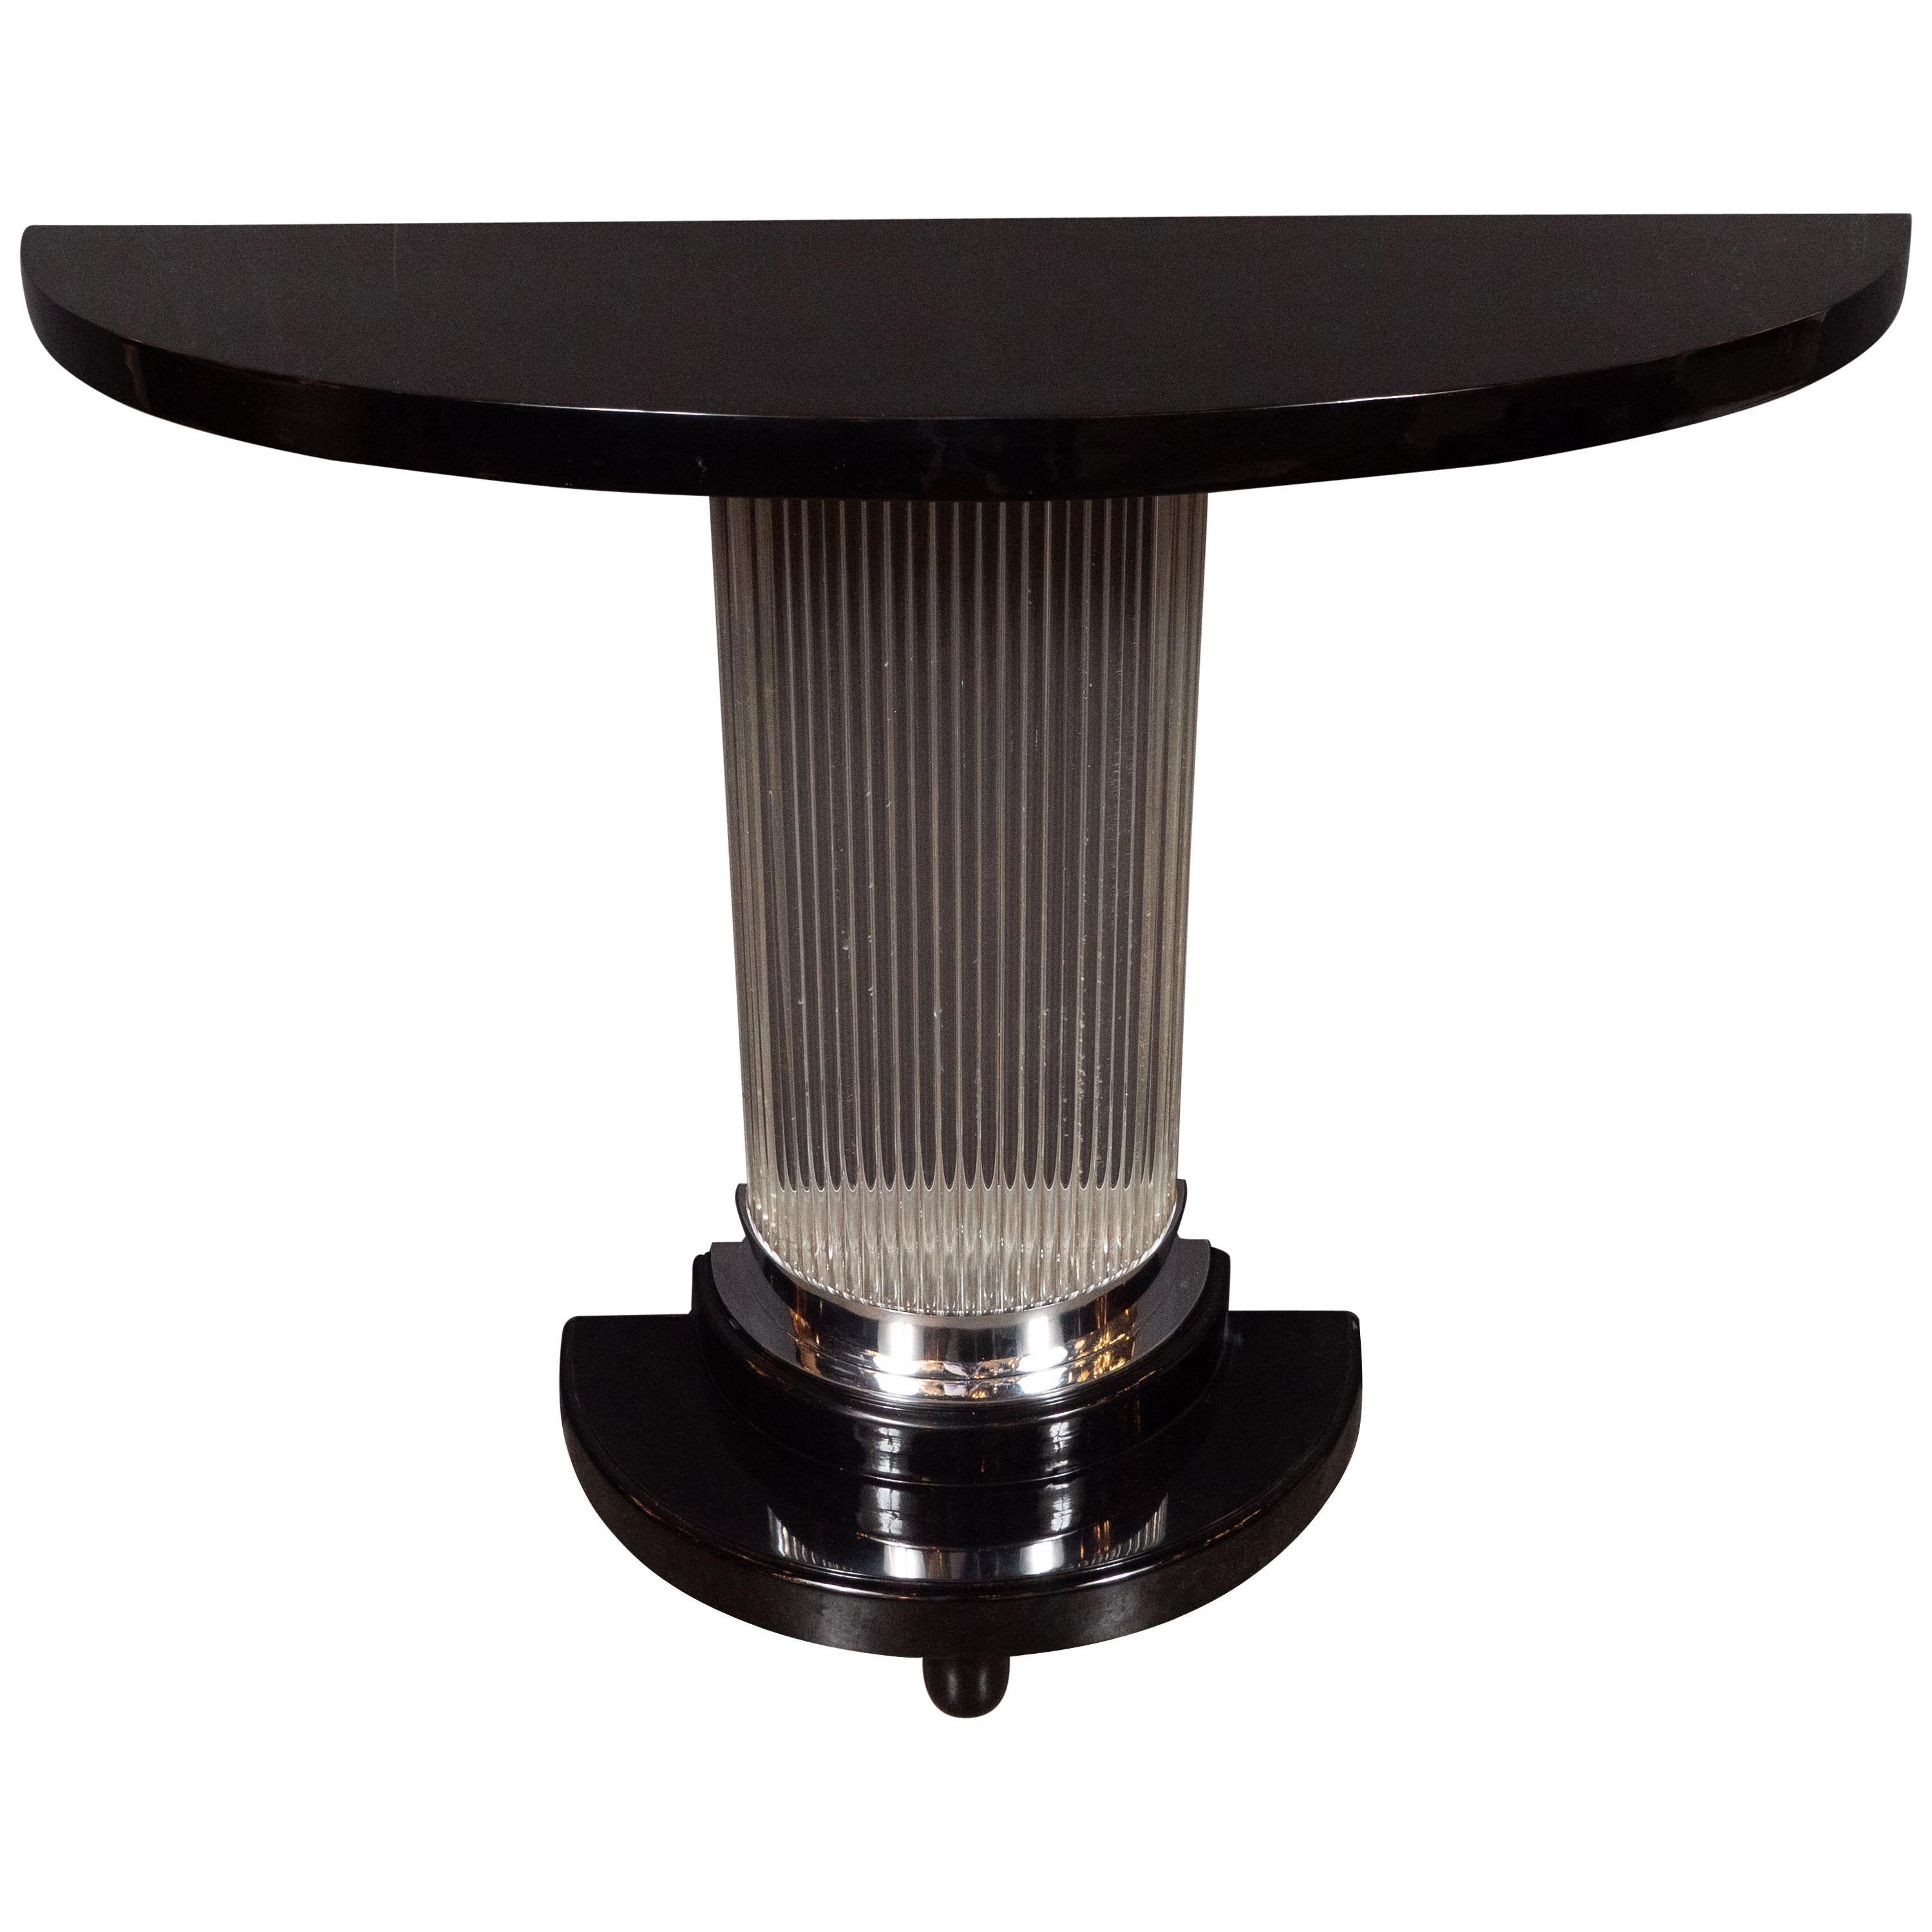 Art Deco Streamlined Black Lacquer Demilune Console Table with Glass Rods